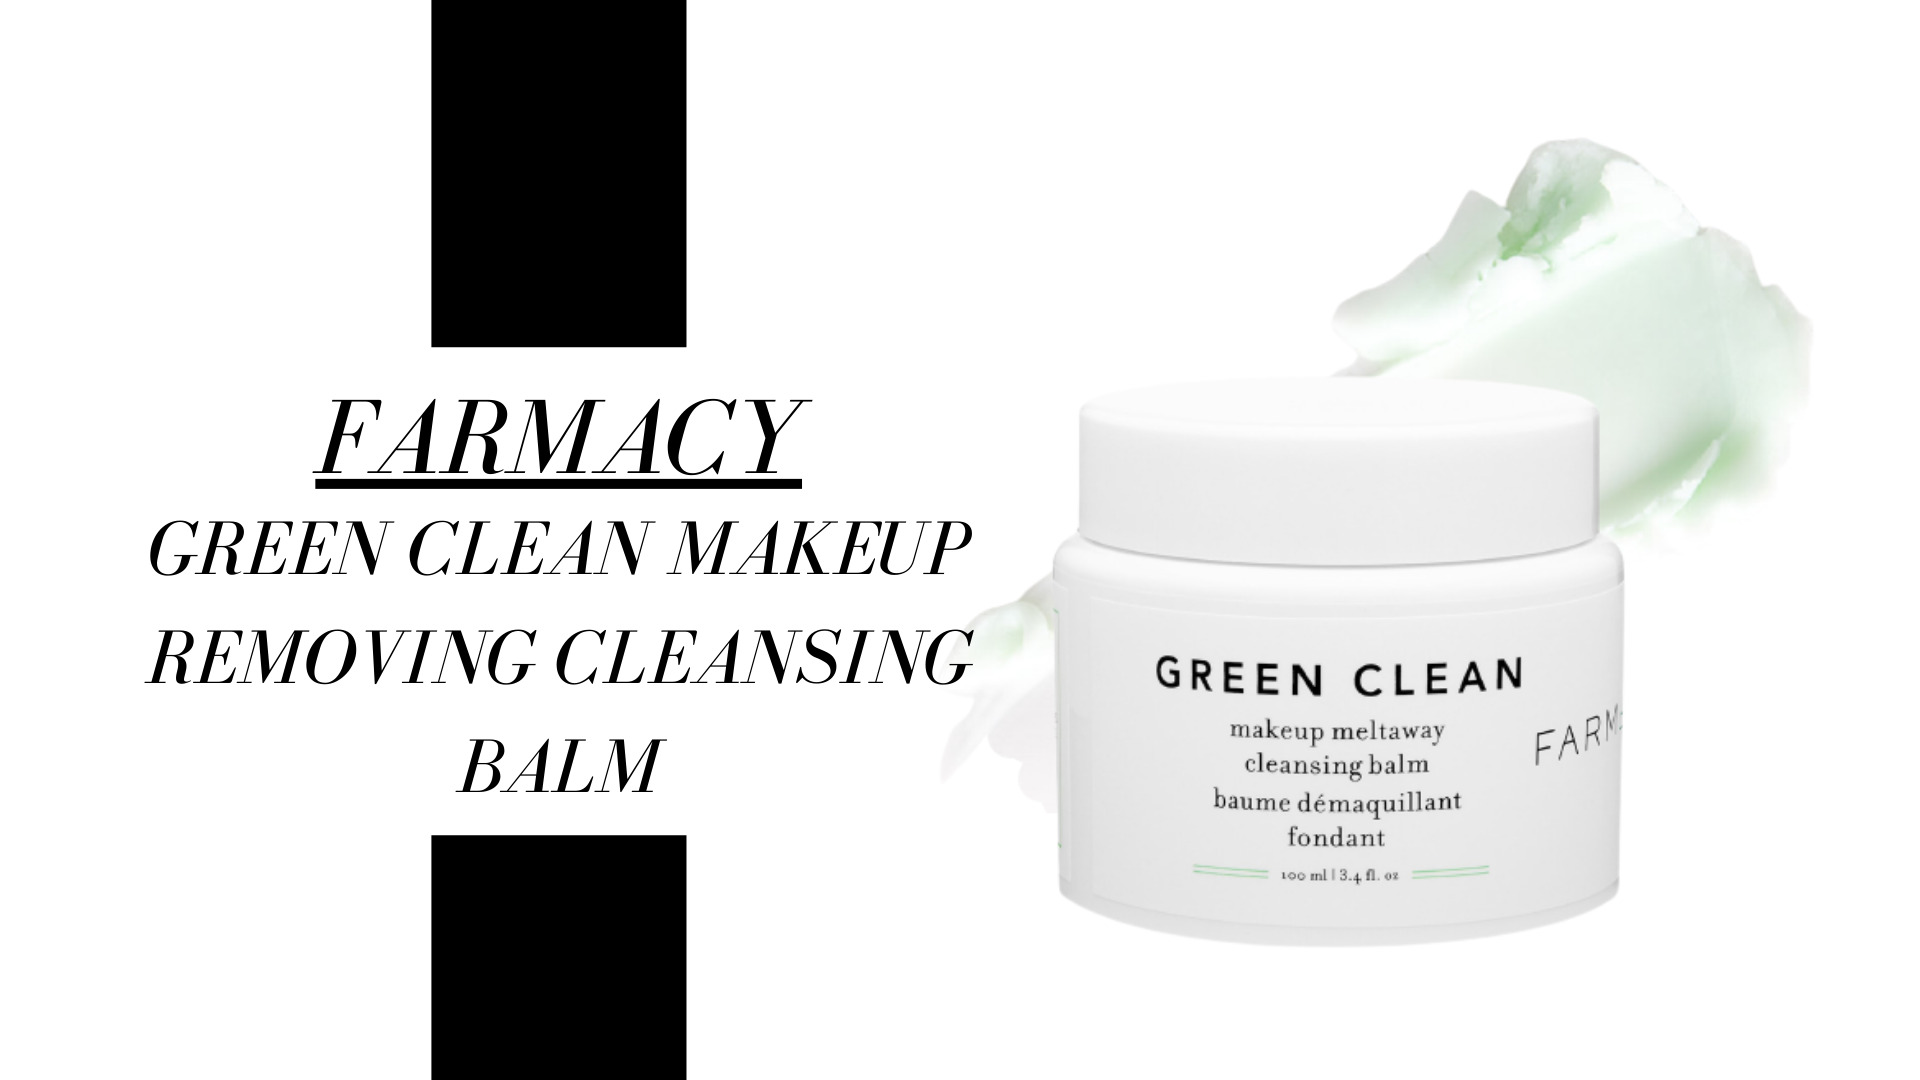 Here at TVM headquarters, we absolutely love the Green Clean Makeup Removing Cleansing Balm by Farmacy. This cleansing balm comes in a cream formula and melts away all the makeup in your face, leaving your skin hydrated and silky smooth. It works great with both Normal, Dry, Combination, and Oily skin types. If you saw our article on sustainable beauty products, you might already know that we are trying to transition to a more sustainable lifestyle. If you are interested in these matters, you will love this product! It is vegan, cruelty-free, and gluten-free. Plus, it comes in recyclable packaging.